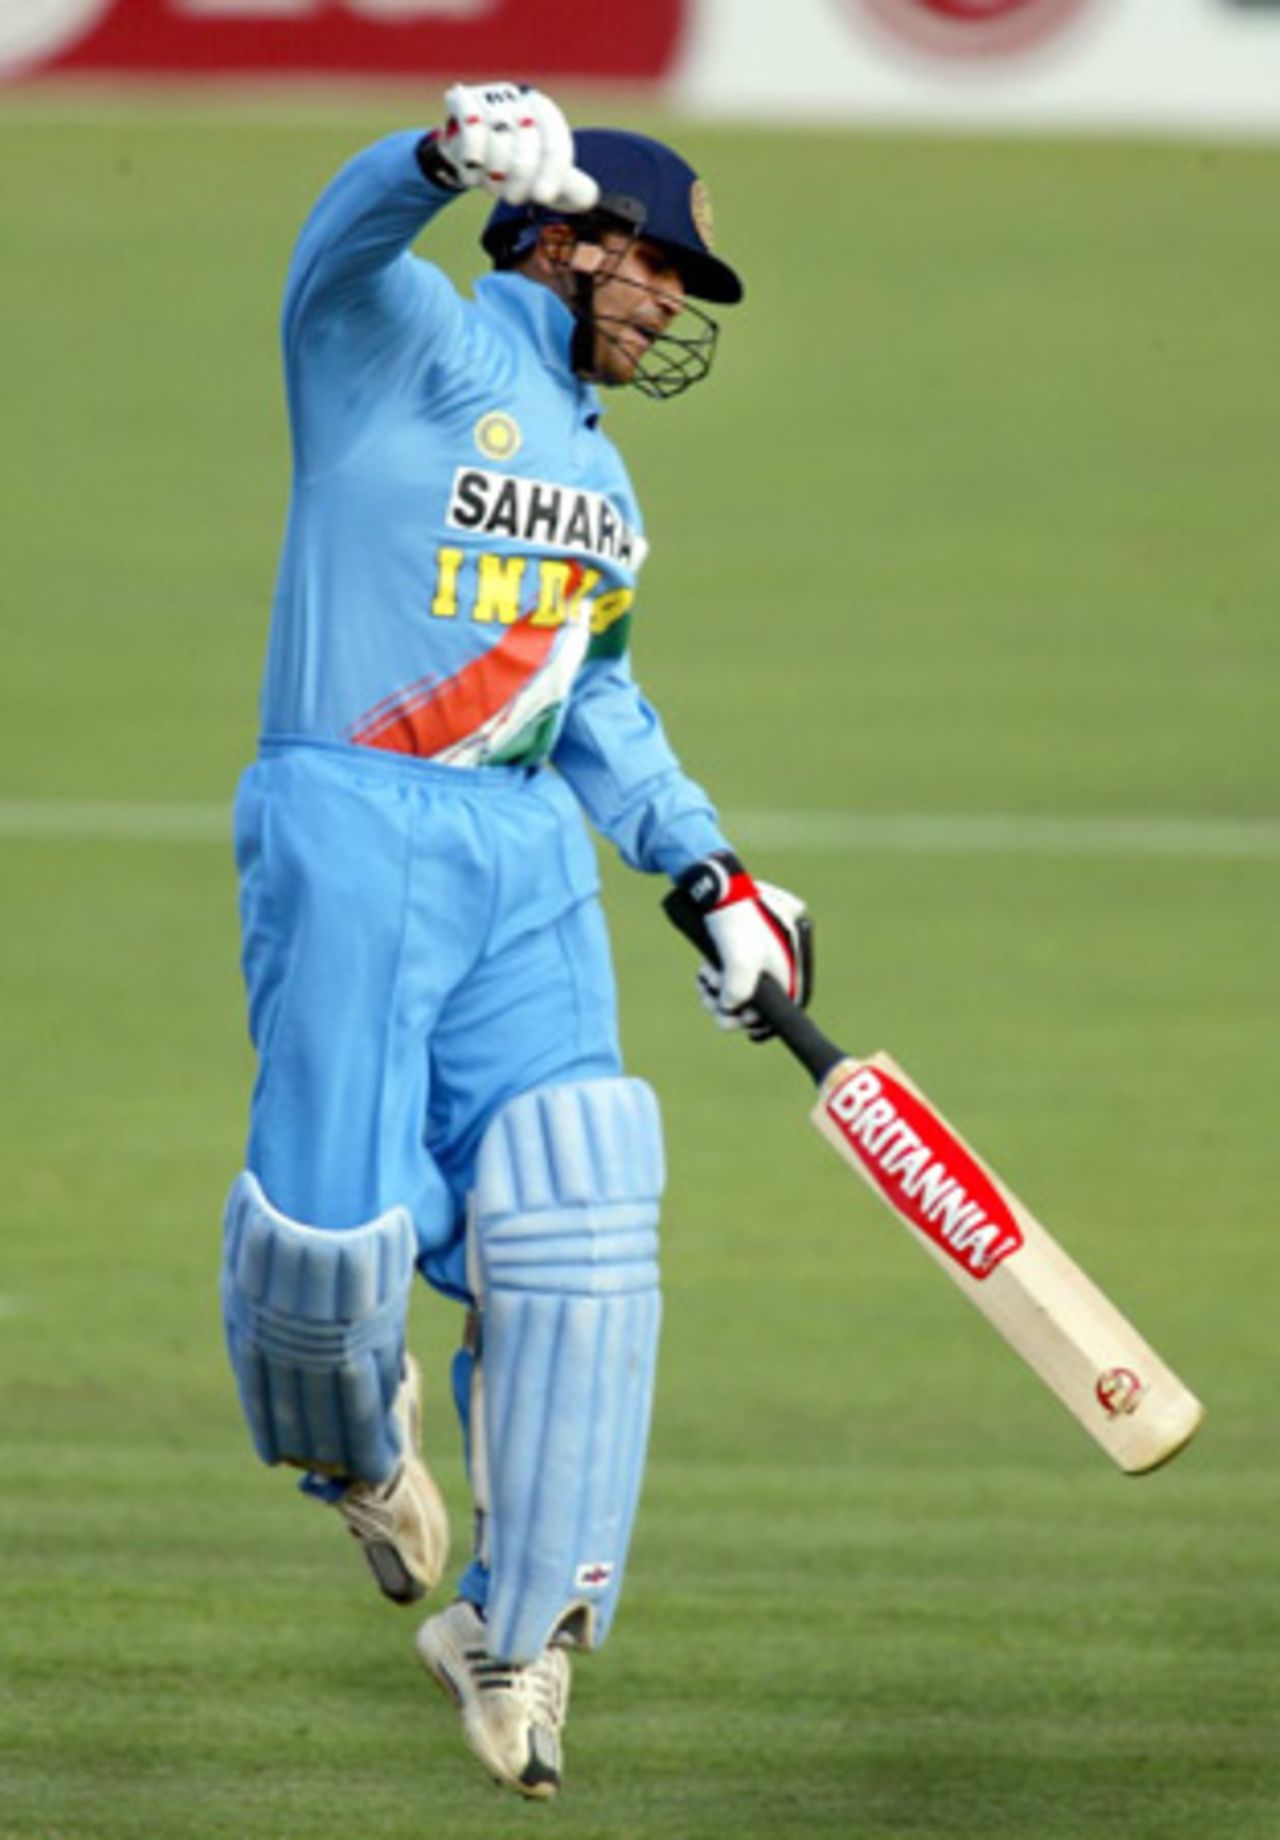 Indian batsman Virender Sehwag celebrates reaching his century. Sehwag went on to score 108. 2nd ODI: New Zealand v India at McLean Park, Napier, 29 December 2002.